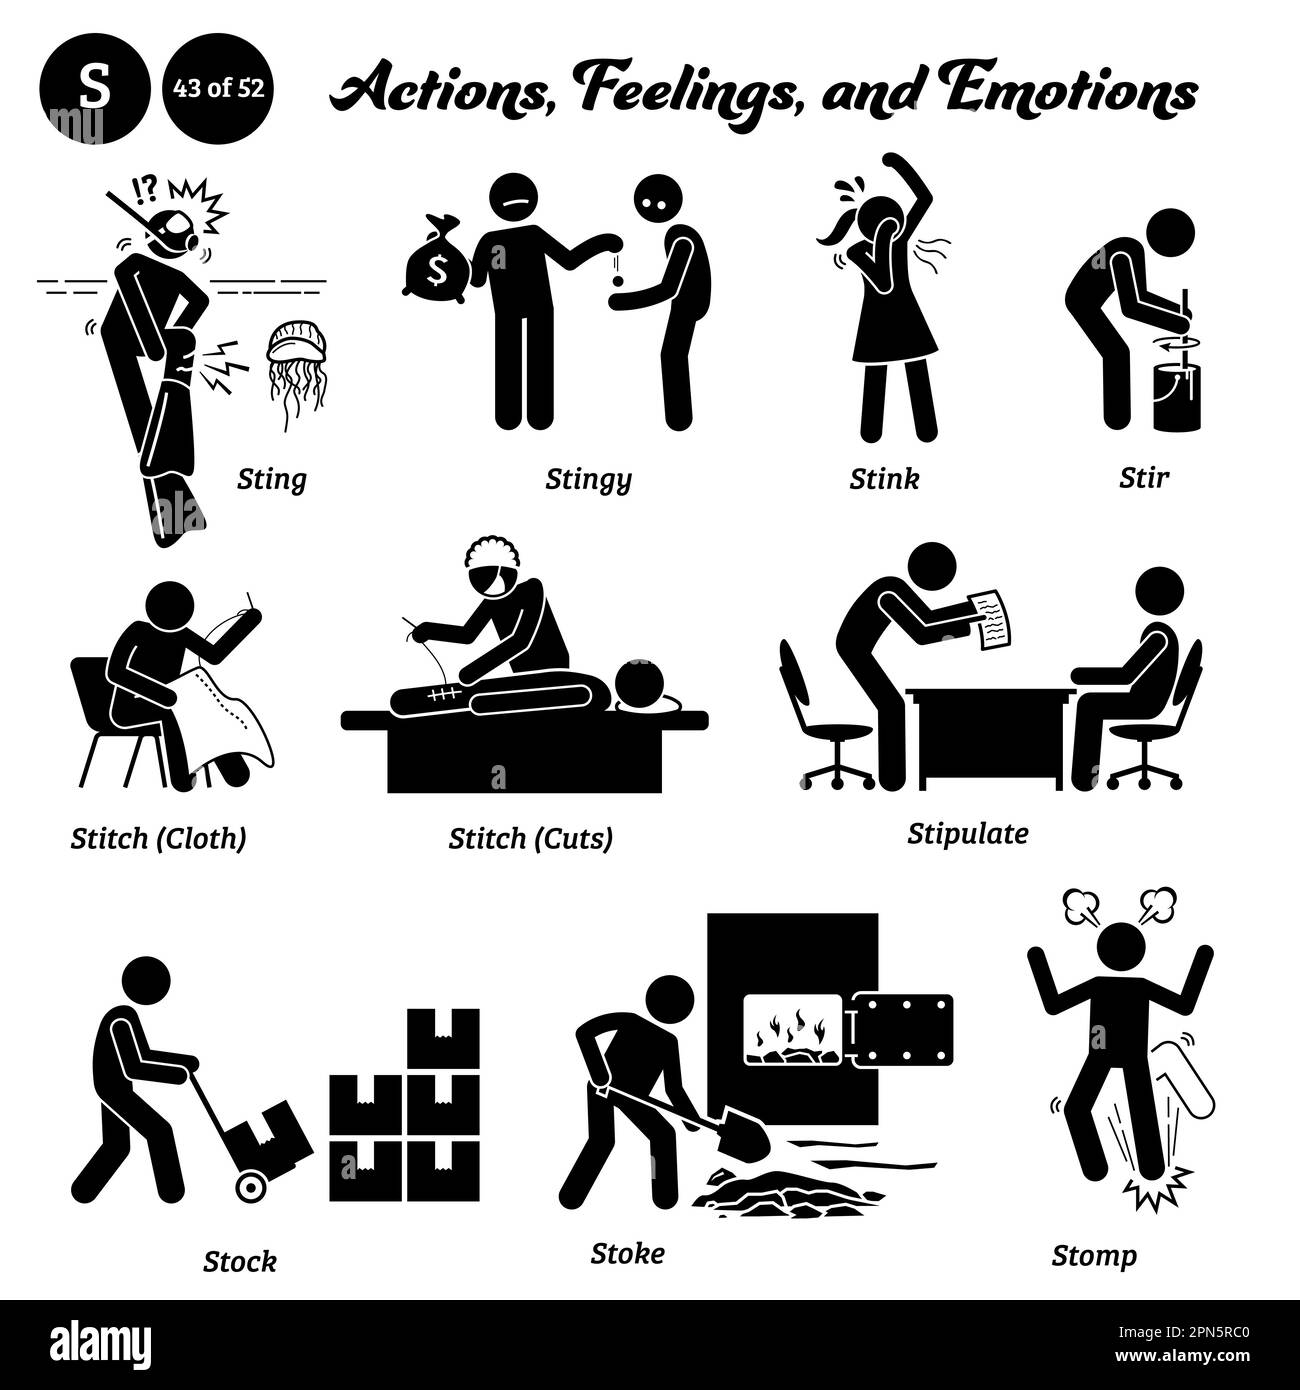 Stick figure human people man action, feelings, and emotions icons alphabet S. Sting, stingy, stink, stir, stitch, cloth, cuts, stipulate, stock, stok Stock Vector